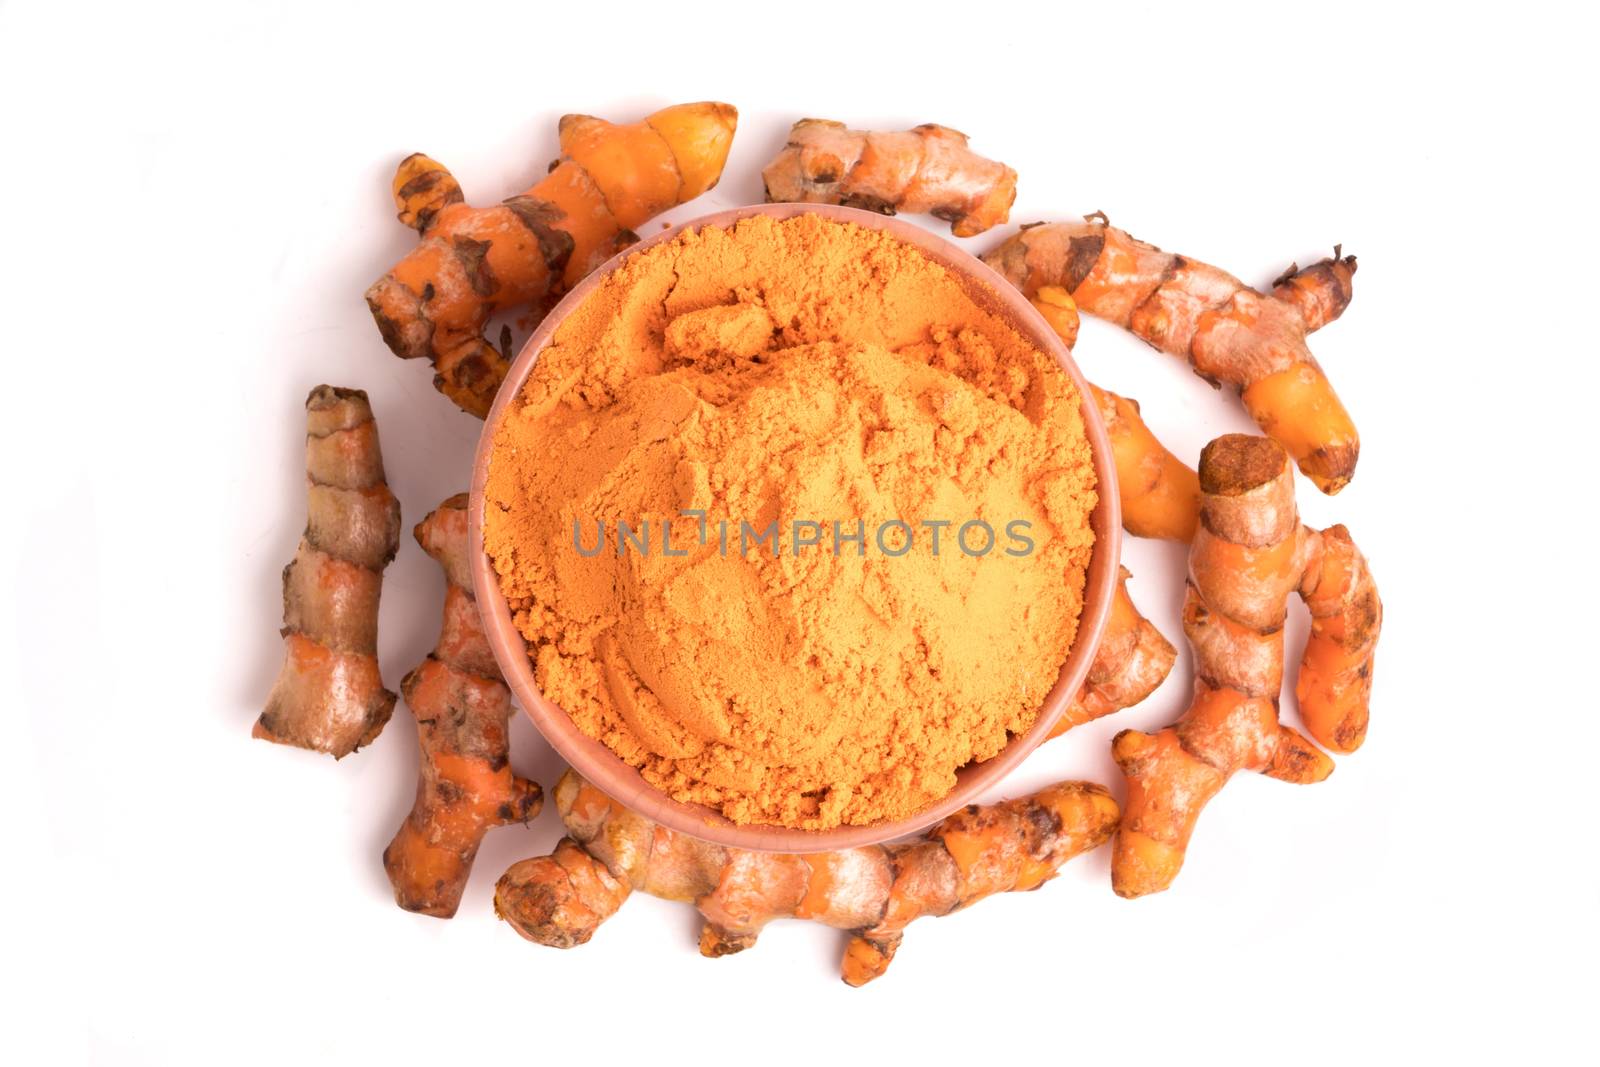 Turmeric roots with turmeric powder on white background.